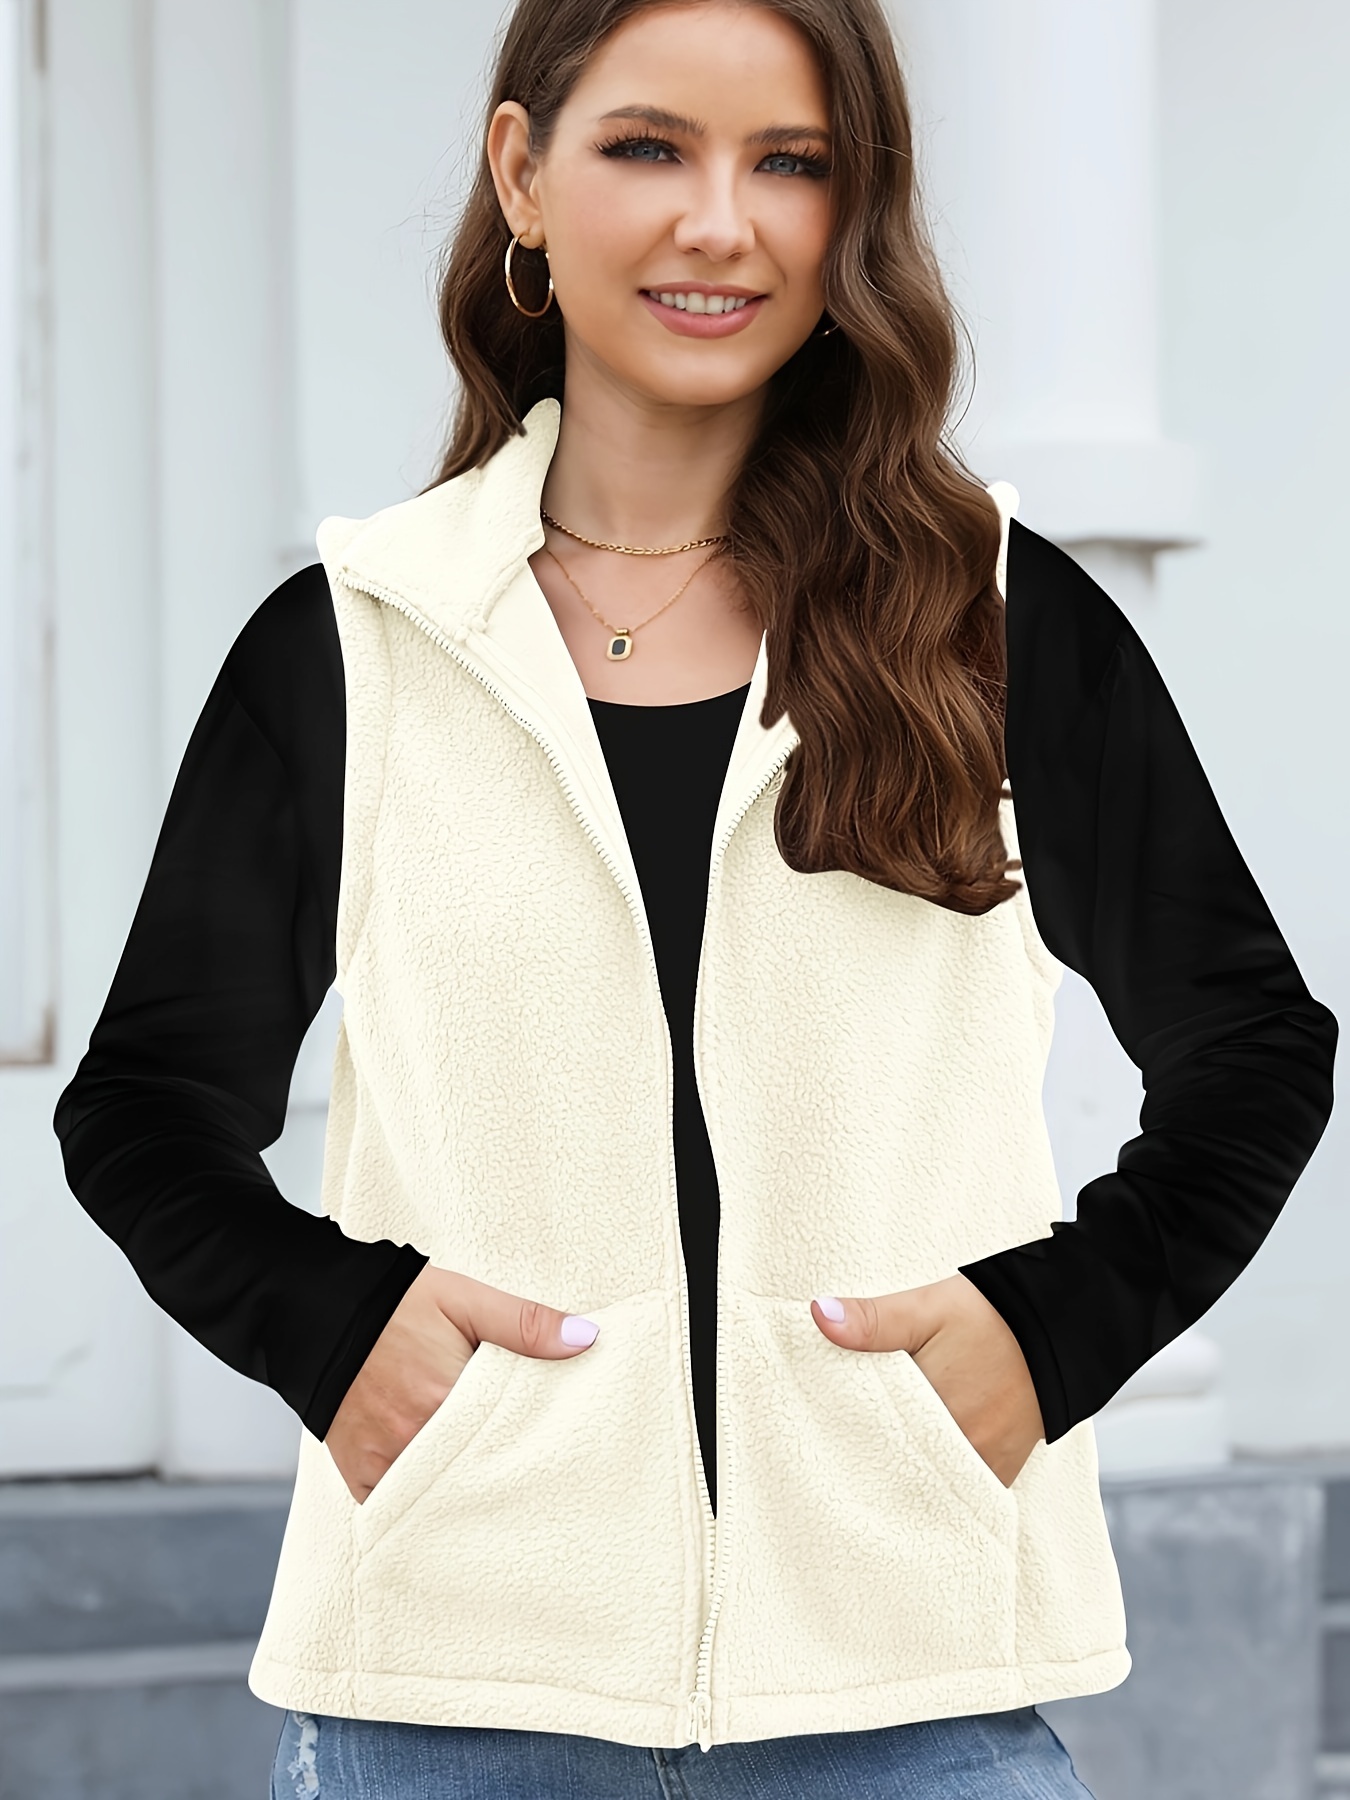 Label Fleece Warm Vest Jacket For Fall Winter Outdoor Sports, Solid Color  Casual Sports Warm Sleeveless Jacket, Women's Clothing